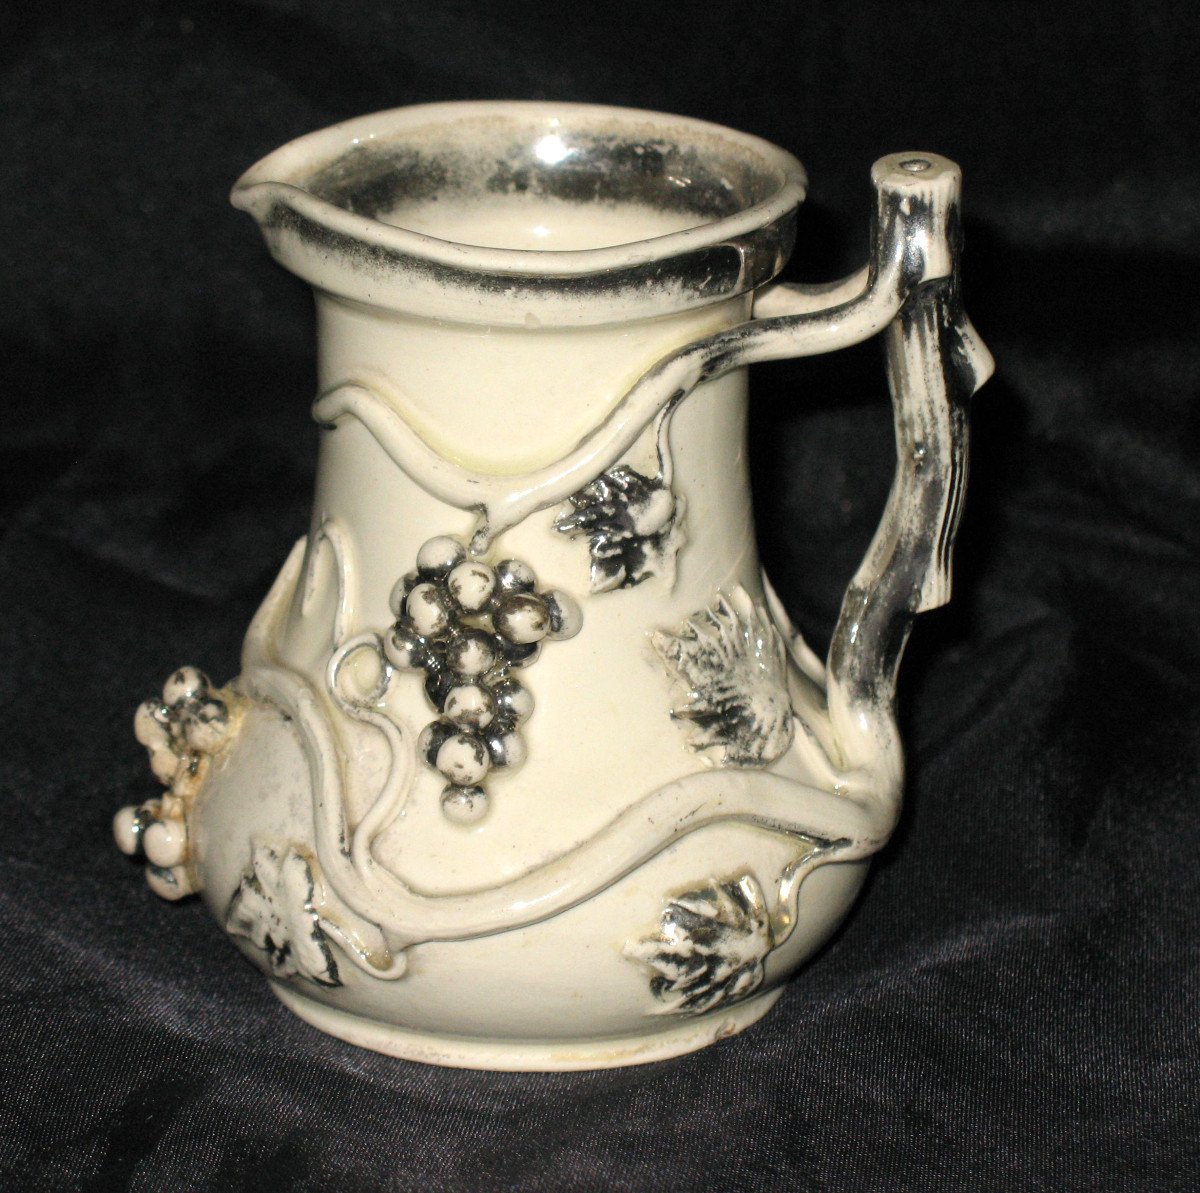 Langeais Earthenware Dinette Pitcher Signed Cb Decorated With Bunches Of Grapes, 19th Century